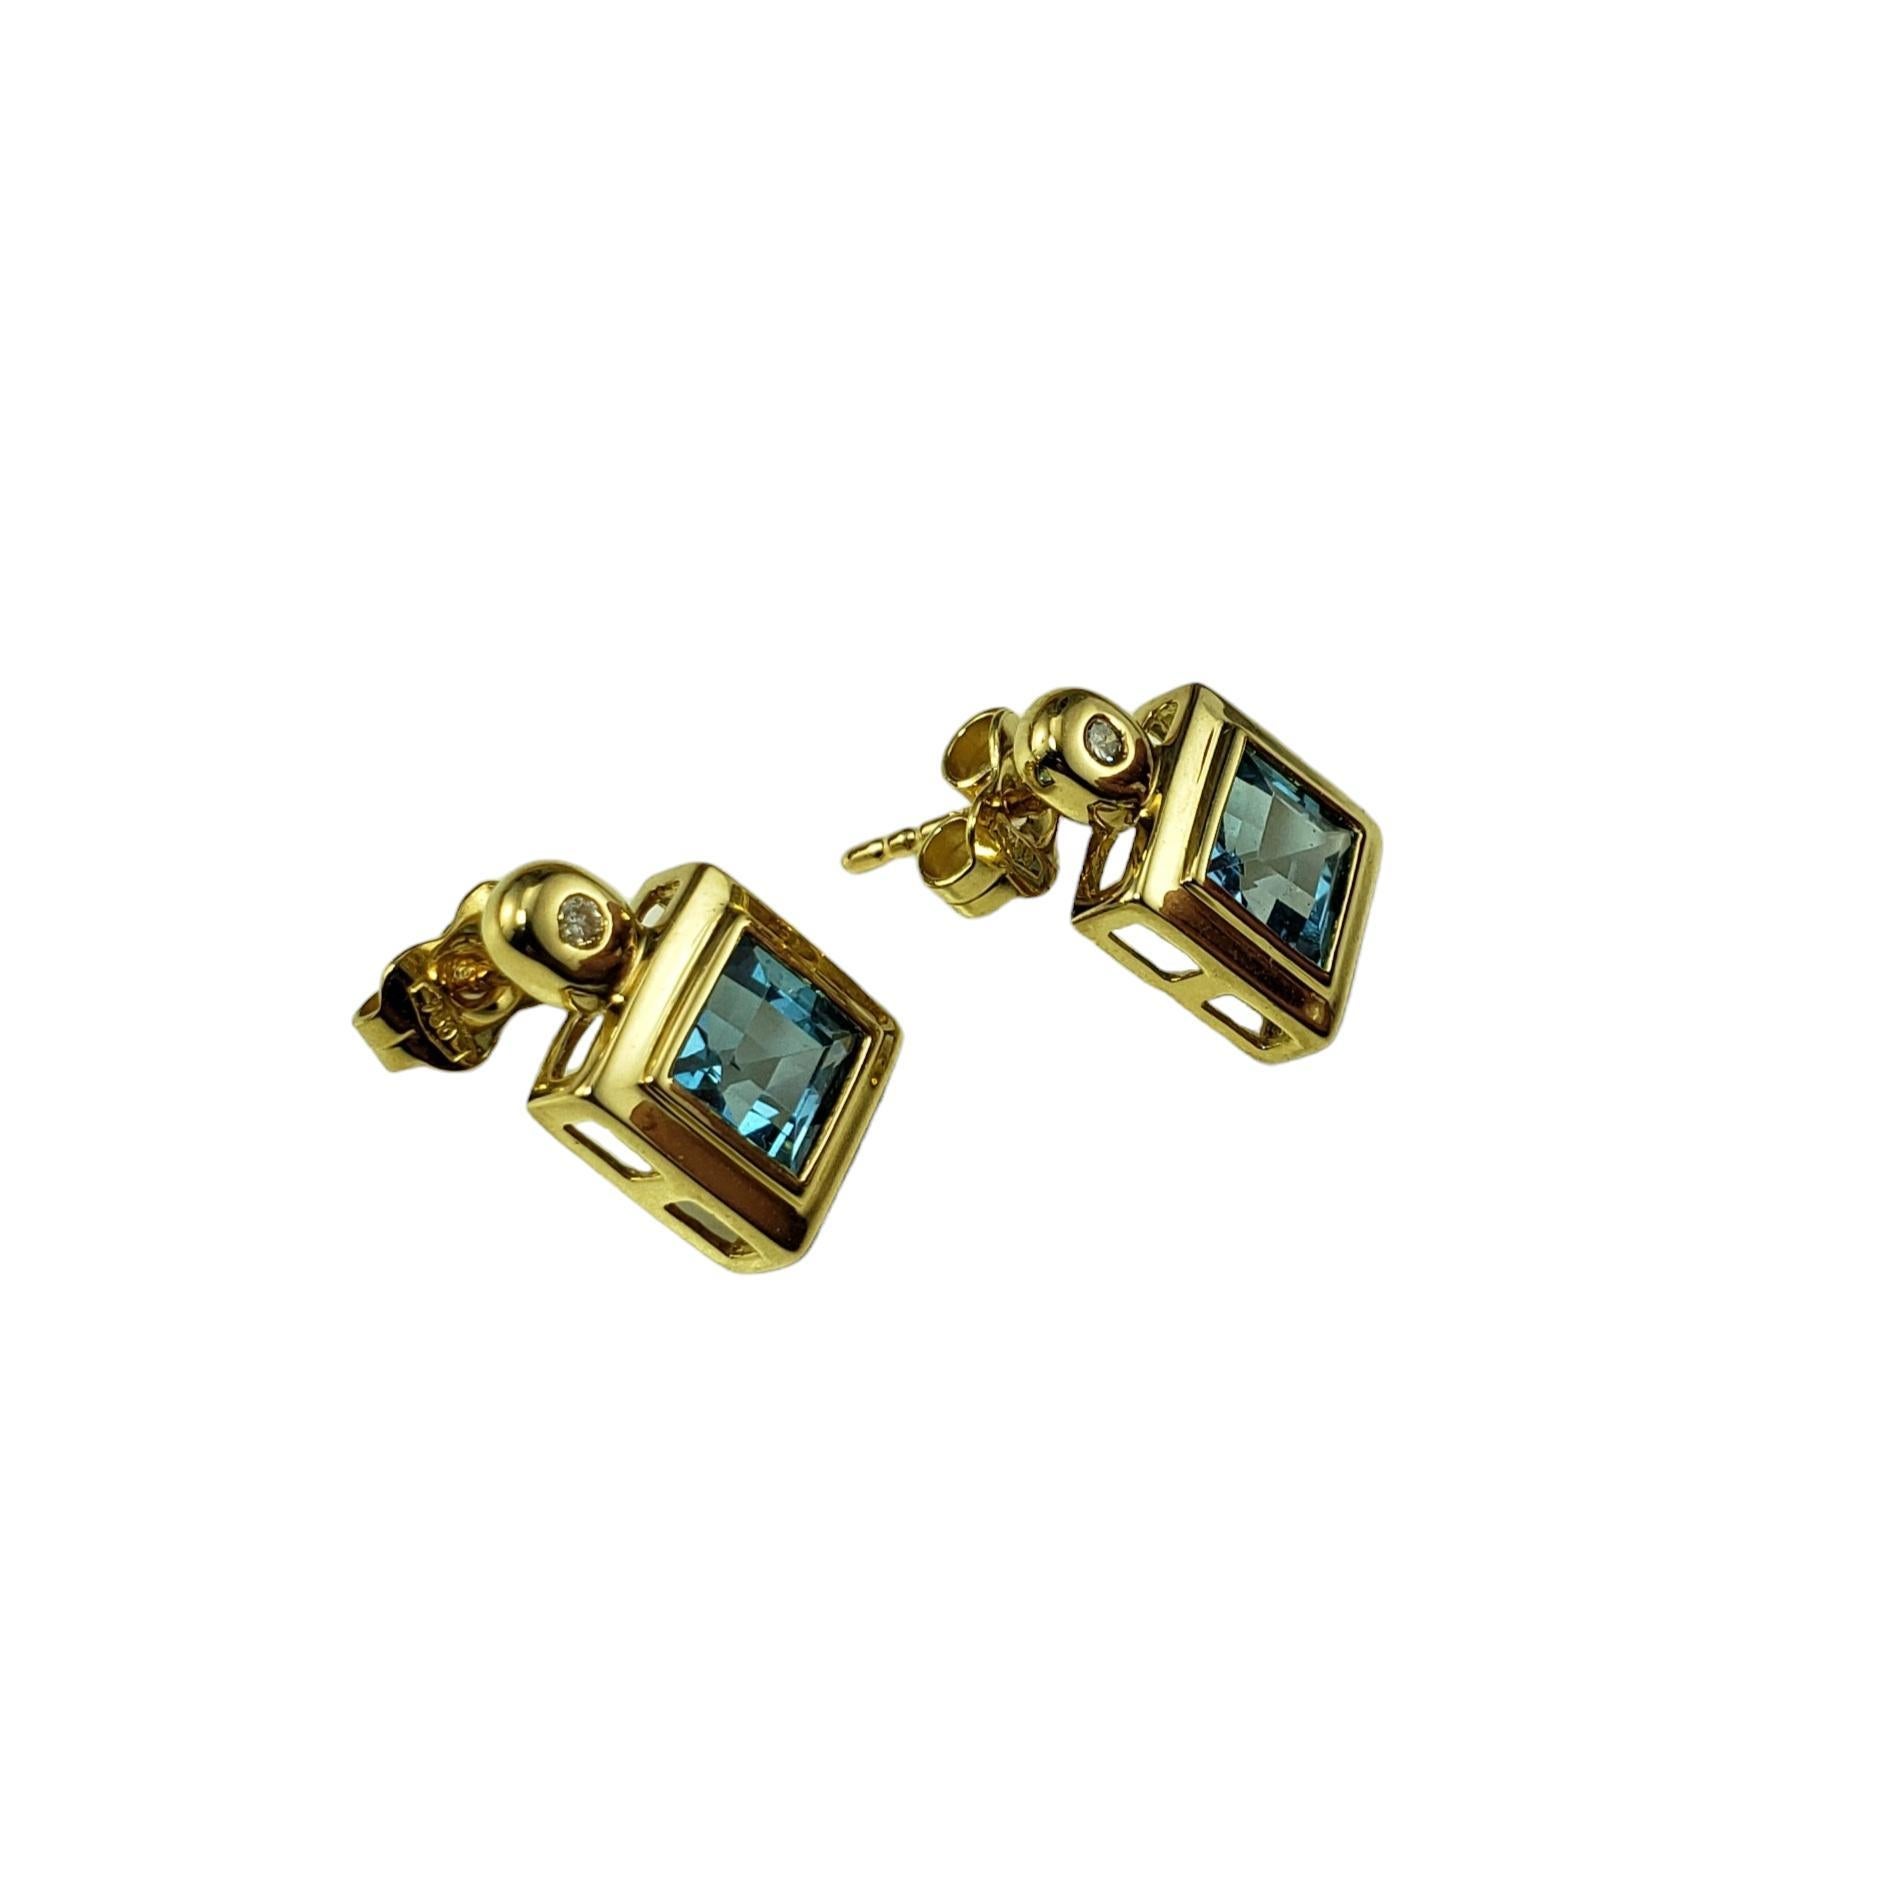 Square Cut 18K Yellow Gold Blue Topaz and Diamond Earrings JAGi Certified #16619